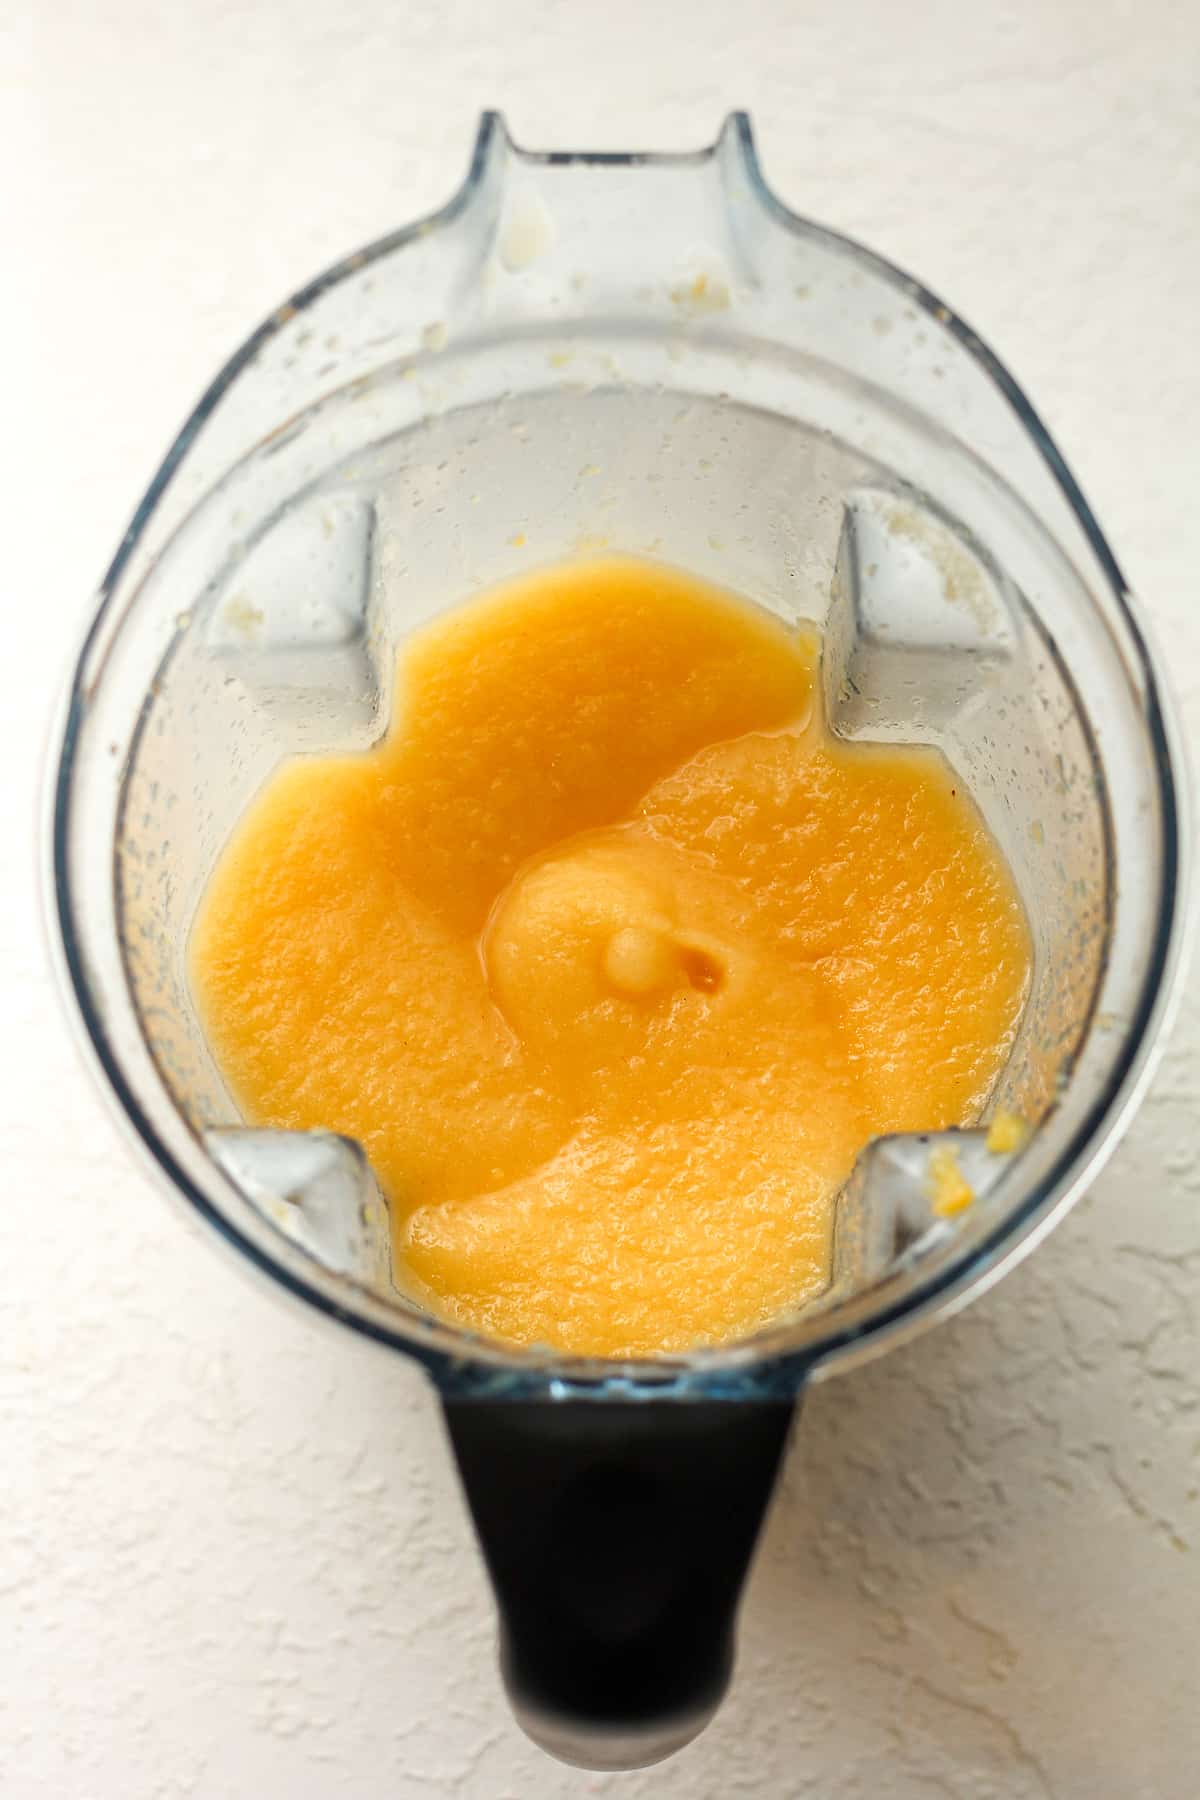 A blender of pureed peaches.